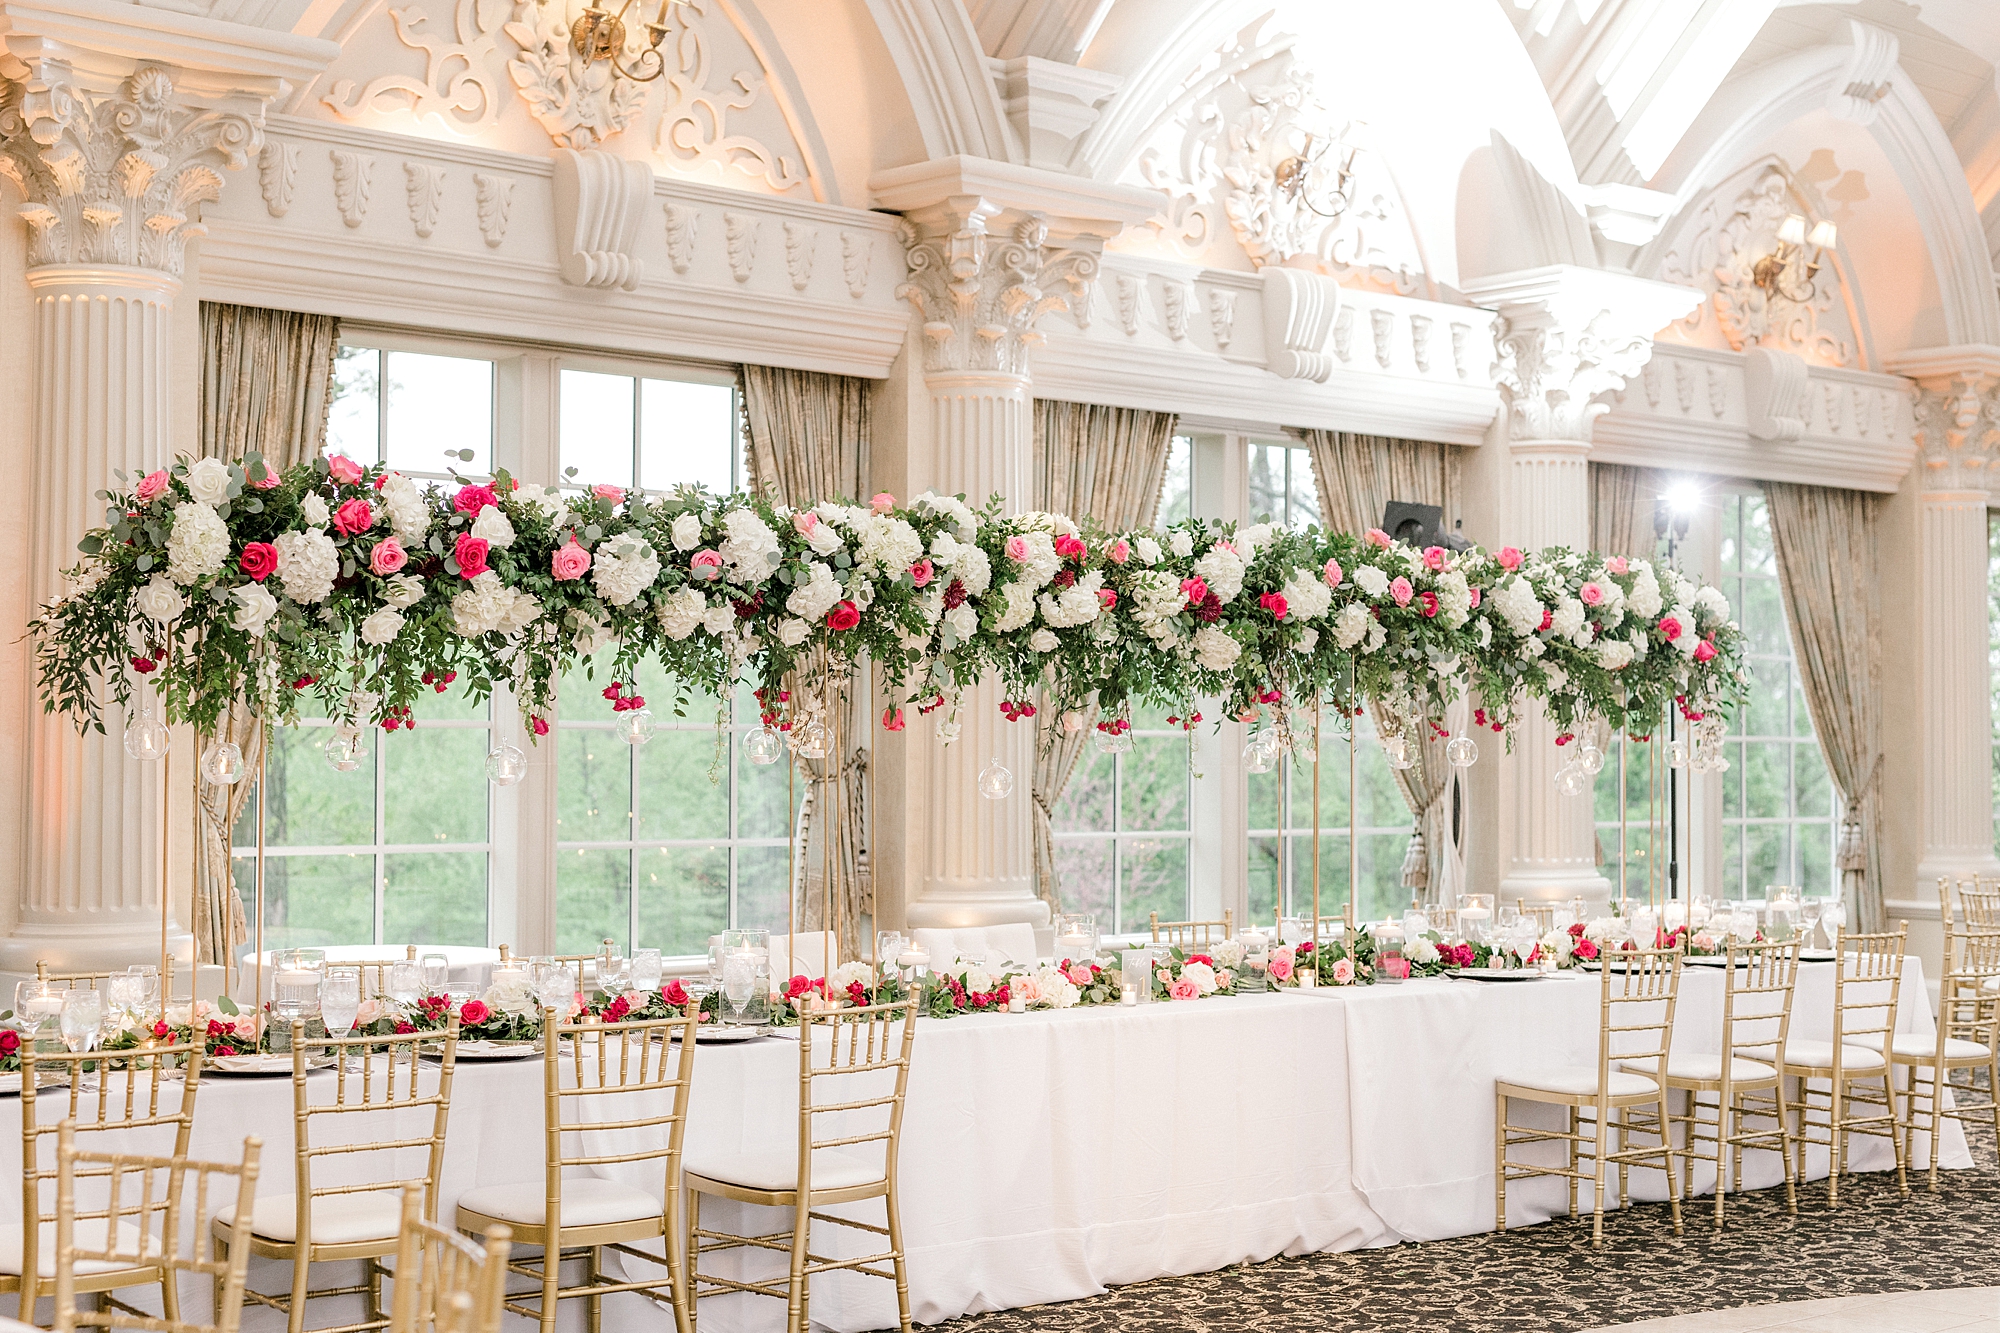 wedding reception tables with tall floral centerpieces of white and pink roses